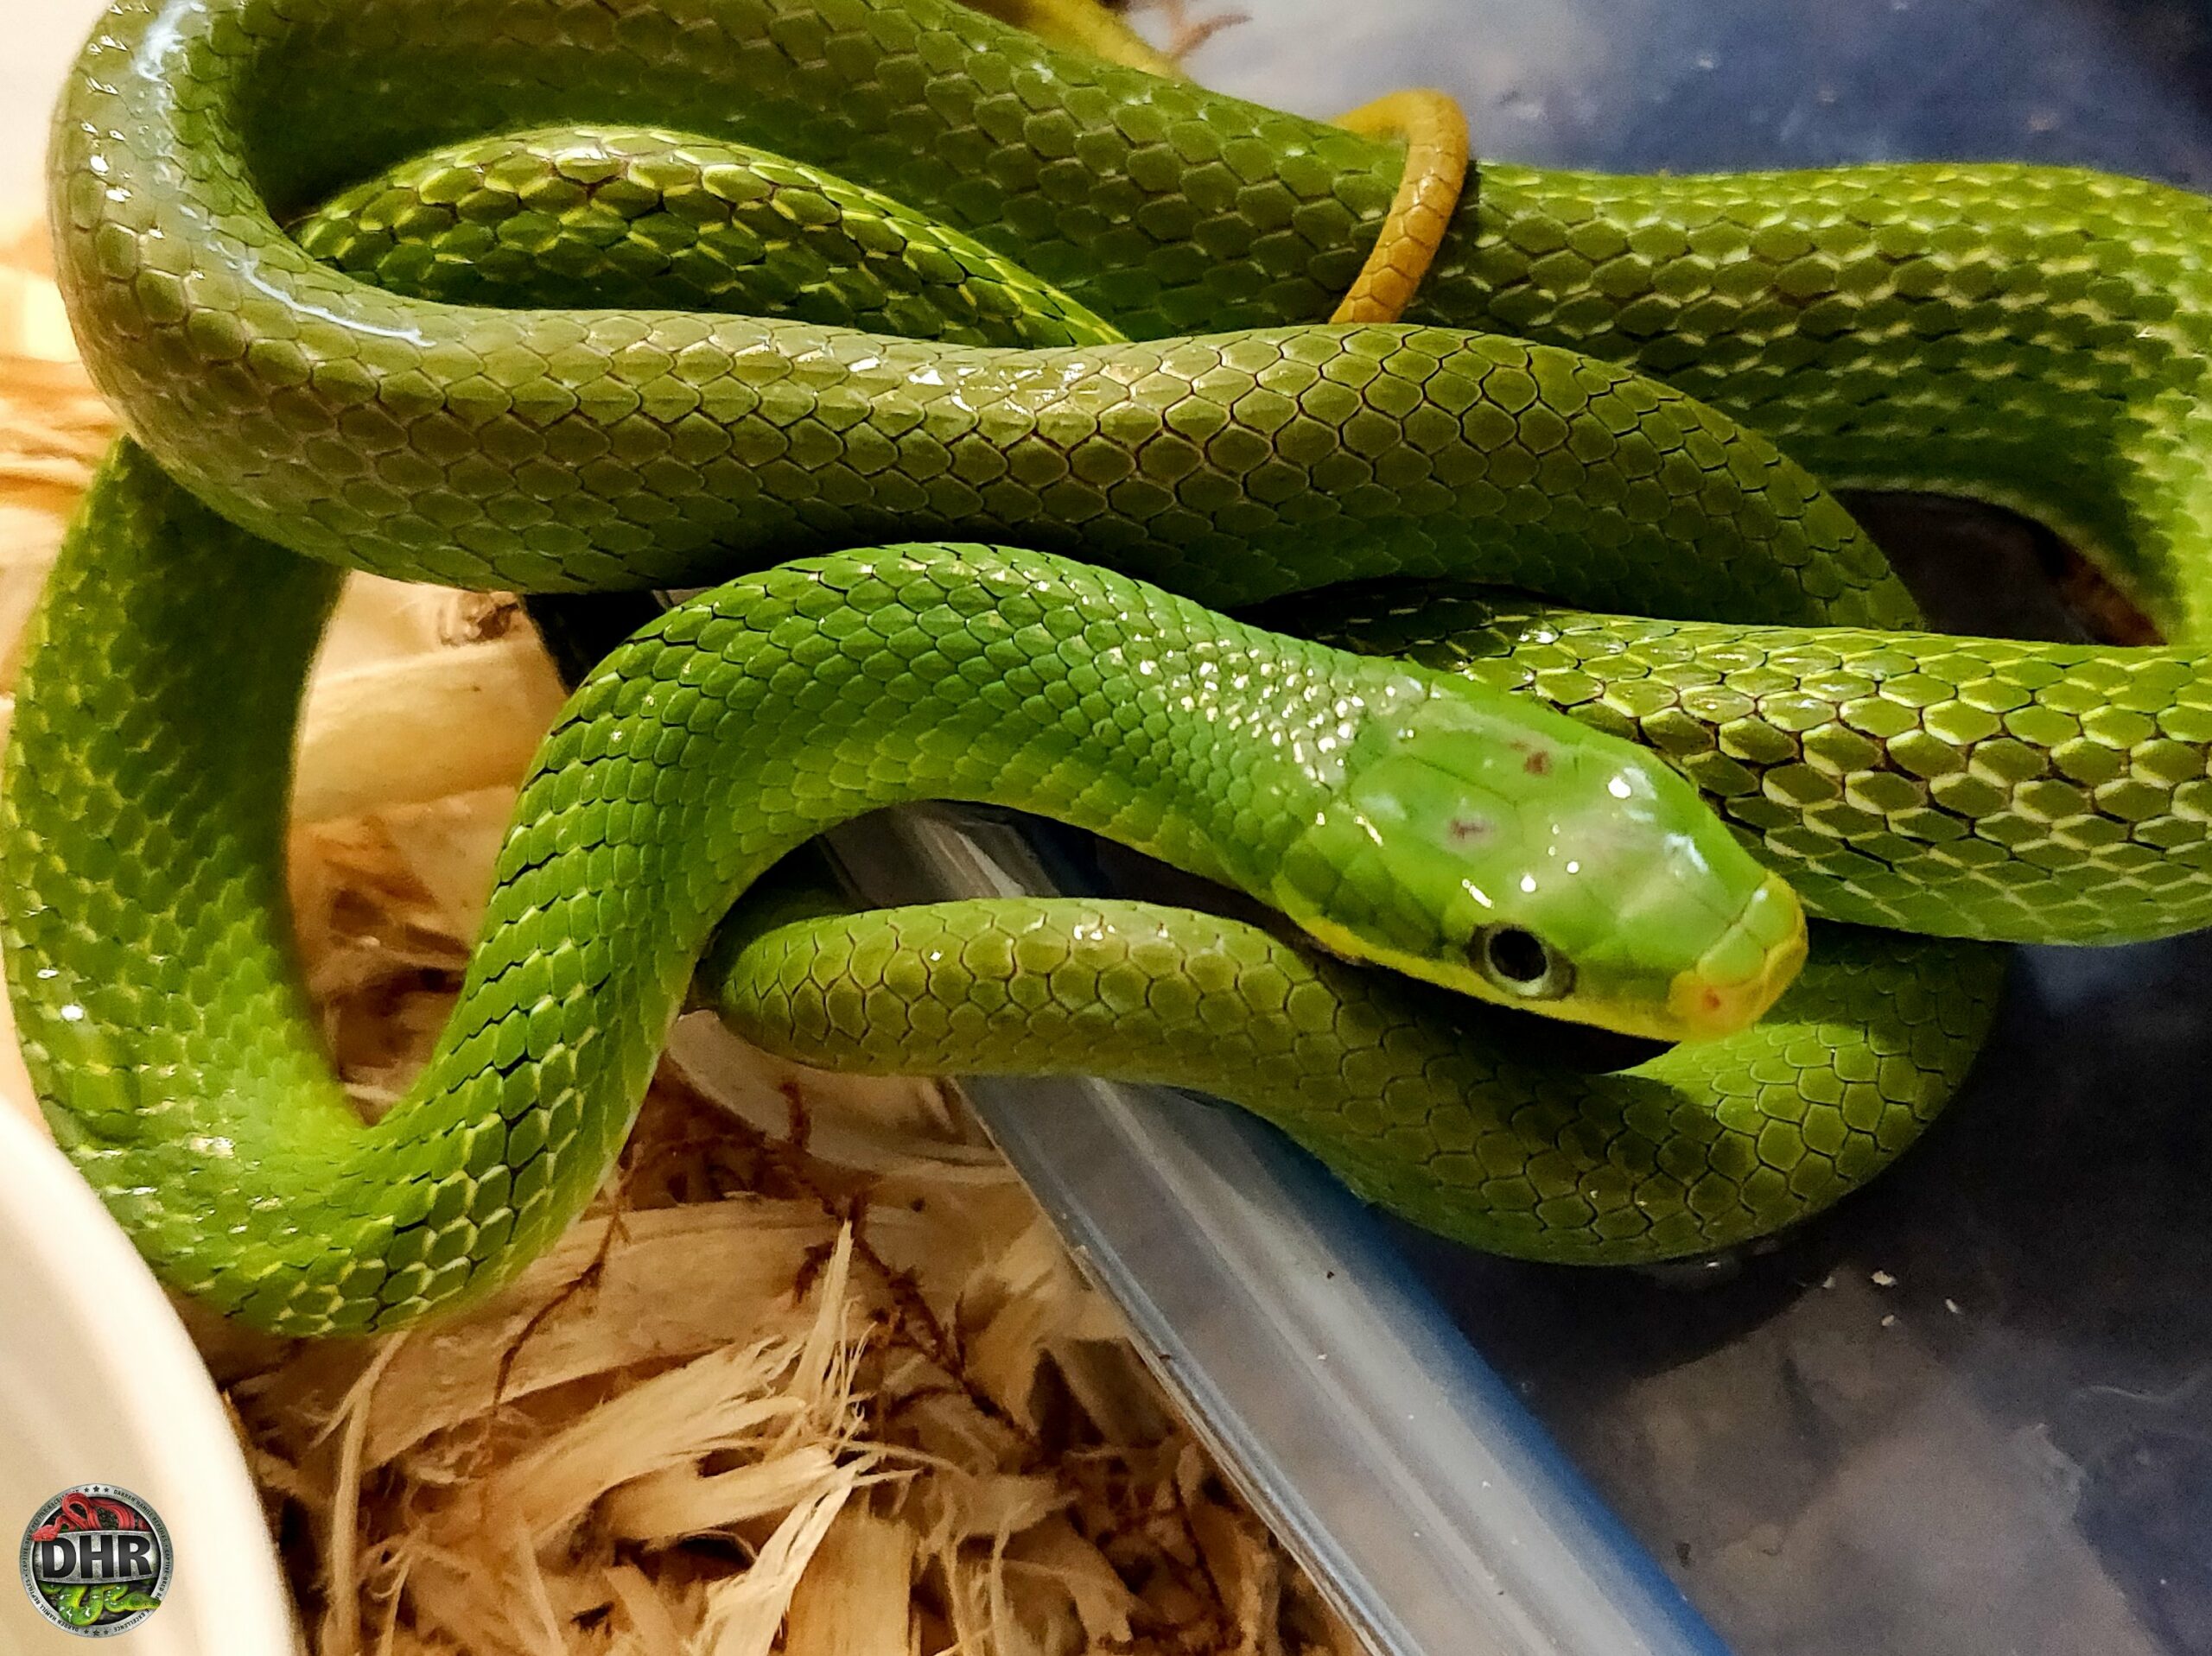 One of our Green Bush Rat Snakes